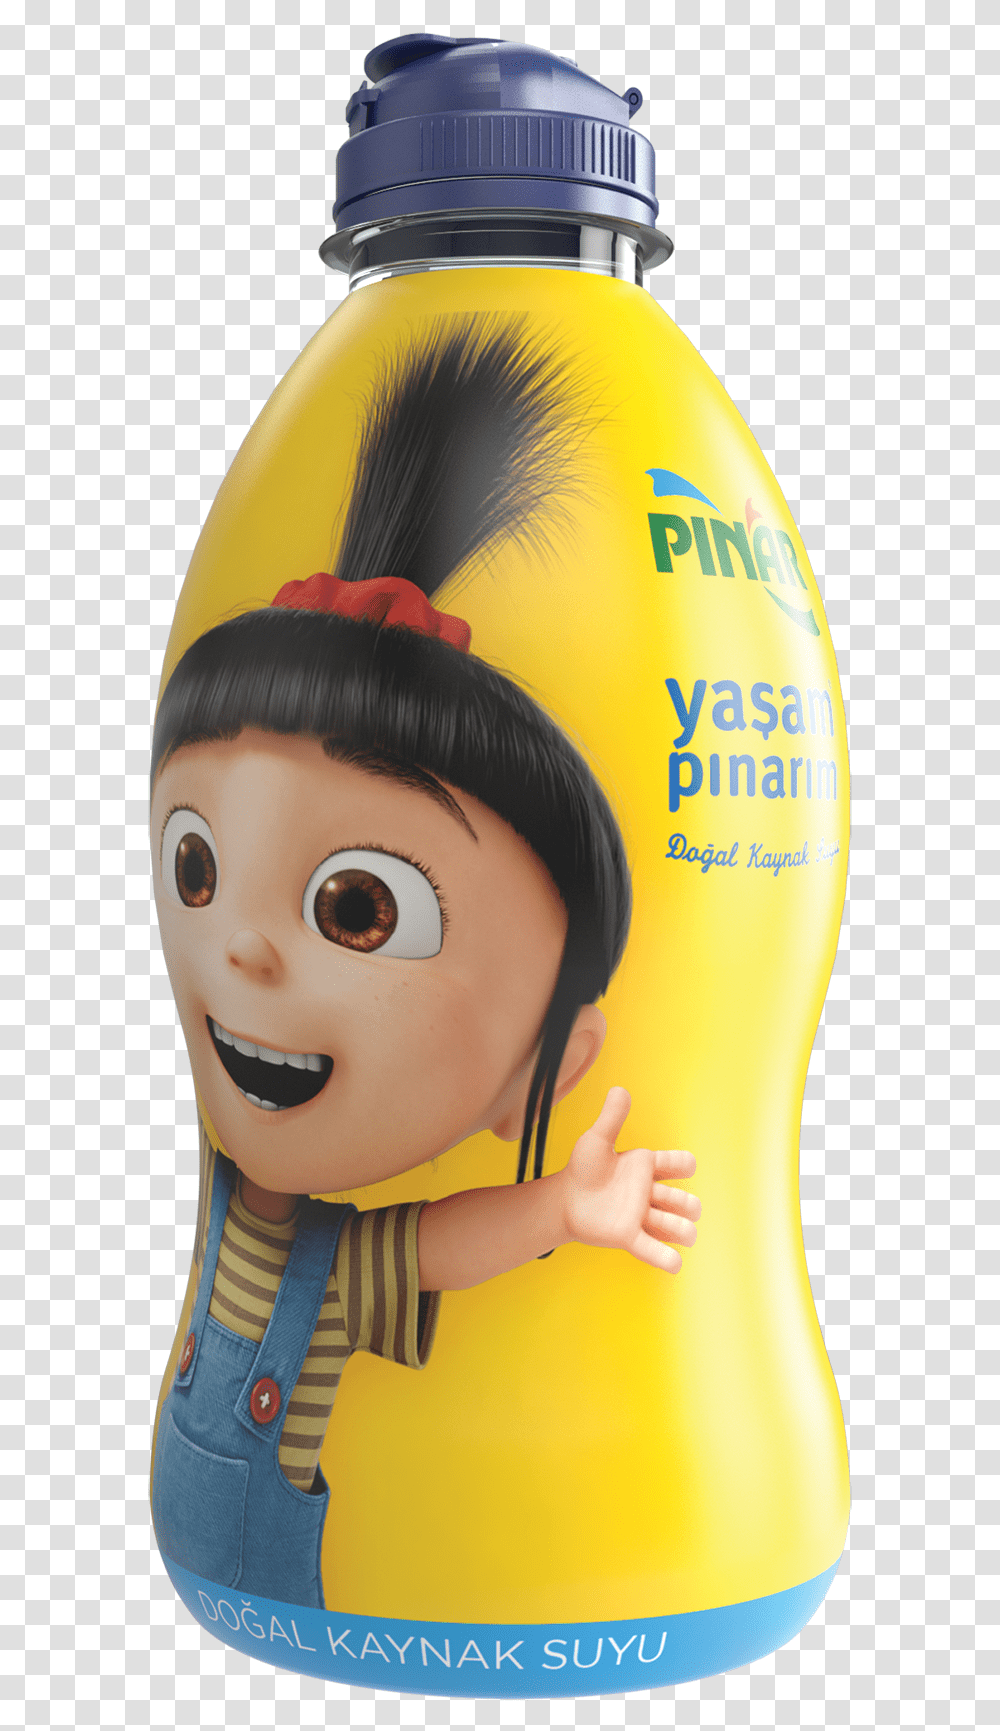 Minions Pnar Su, Bottle, Doll, Toy, Cosmetics Transparent Png